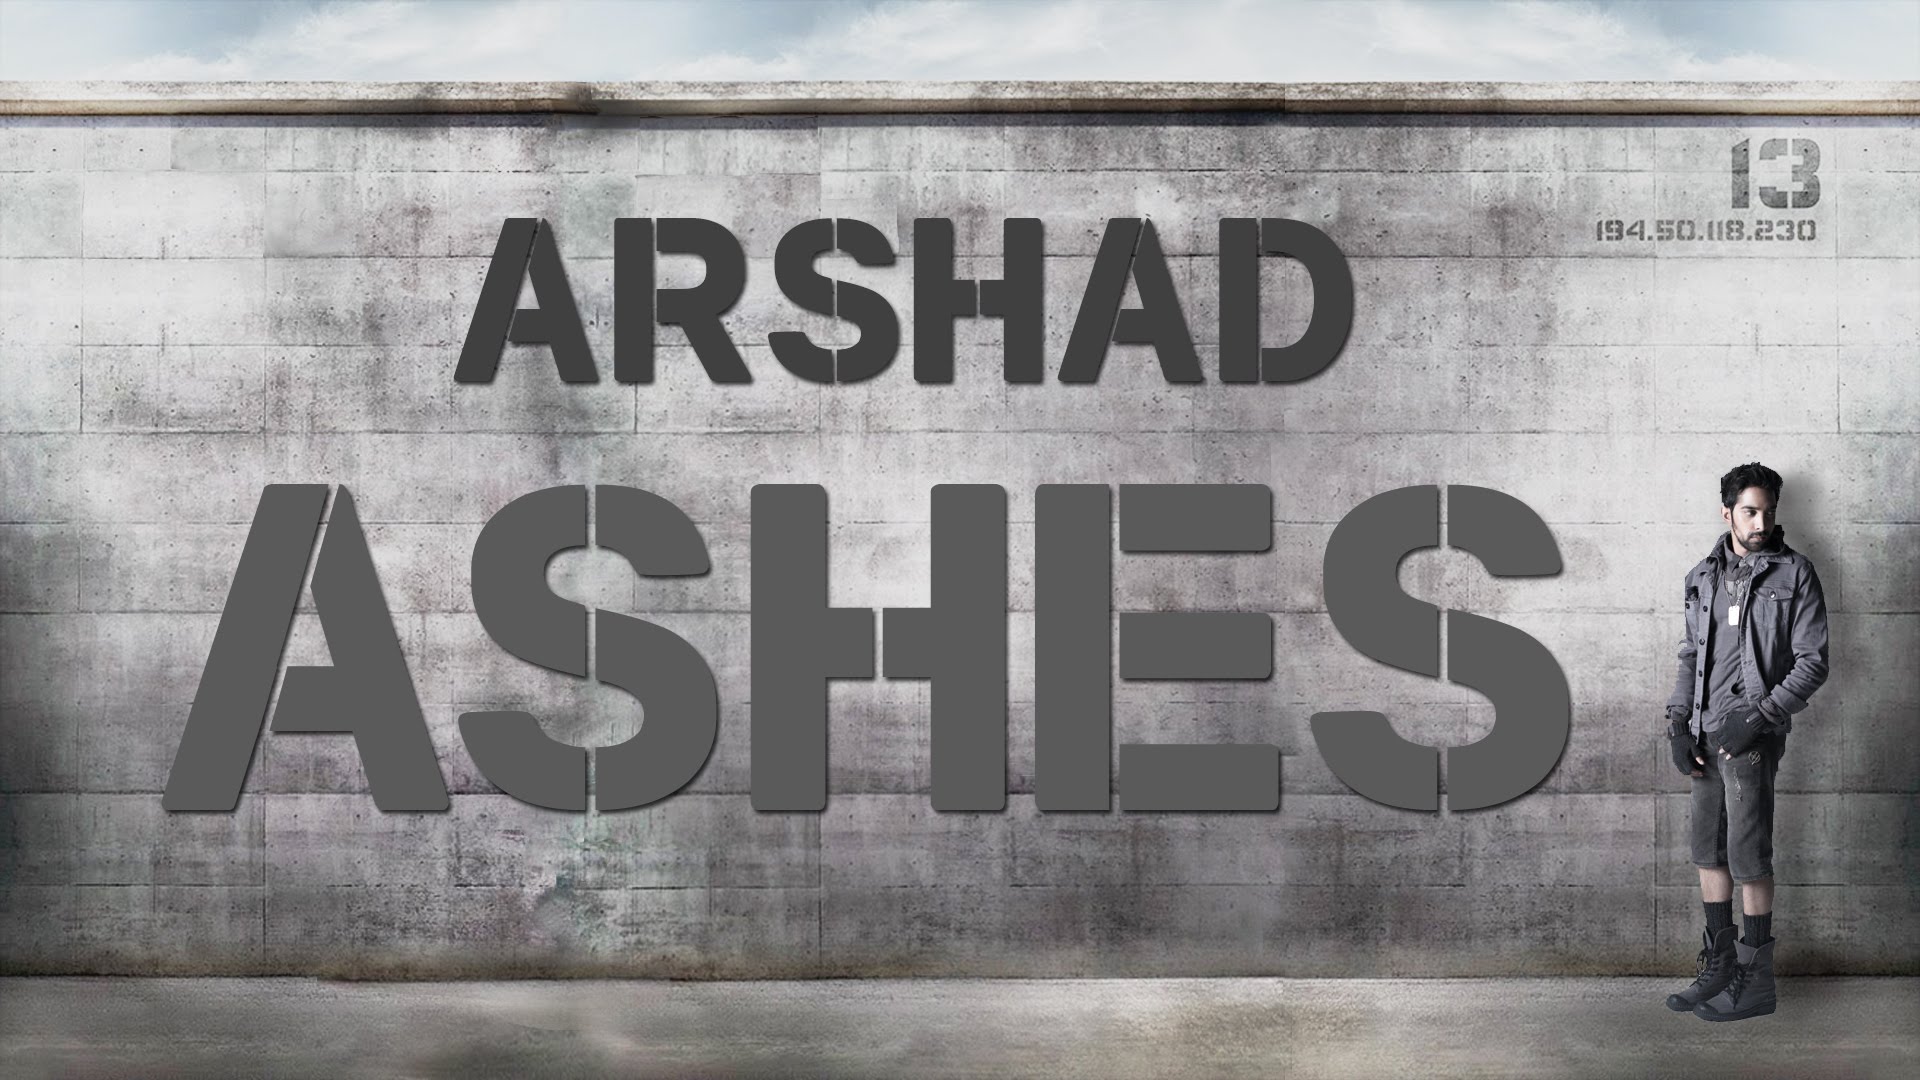 Arshad – Ashes